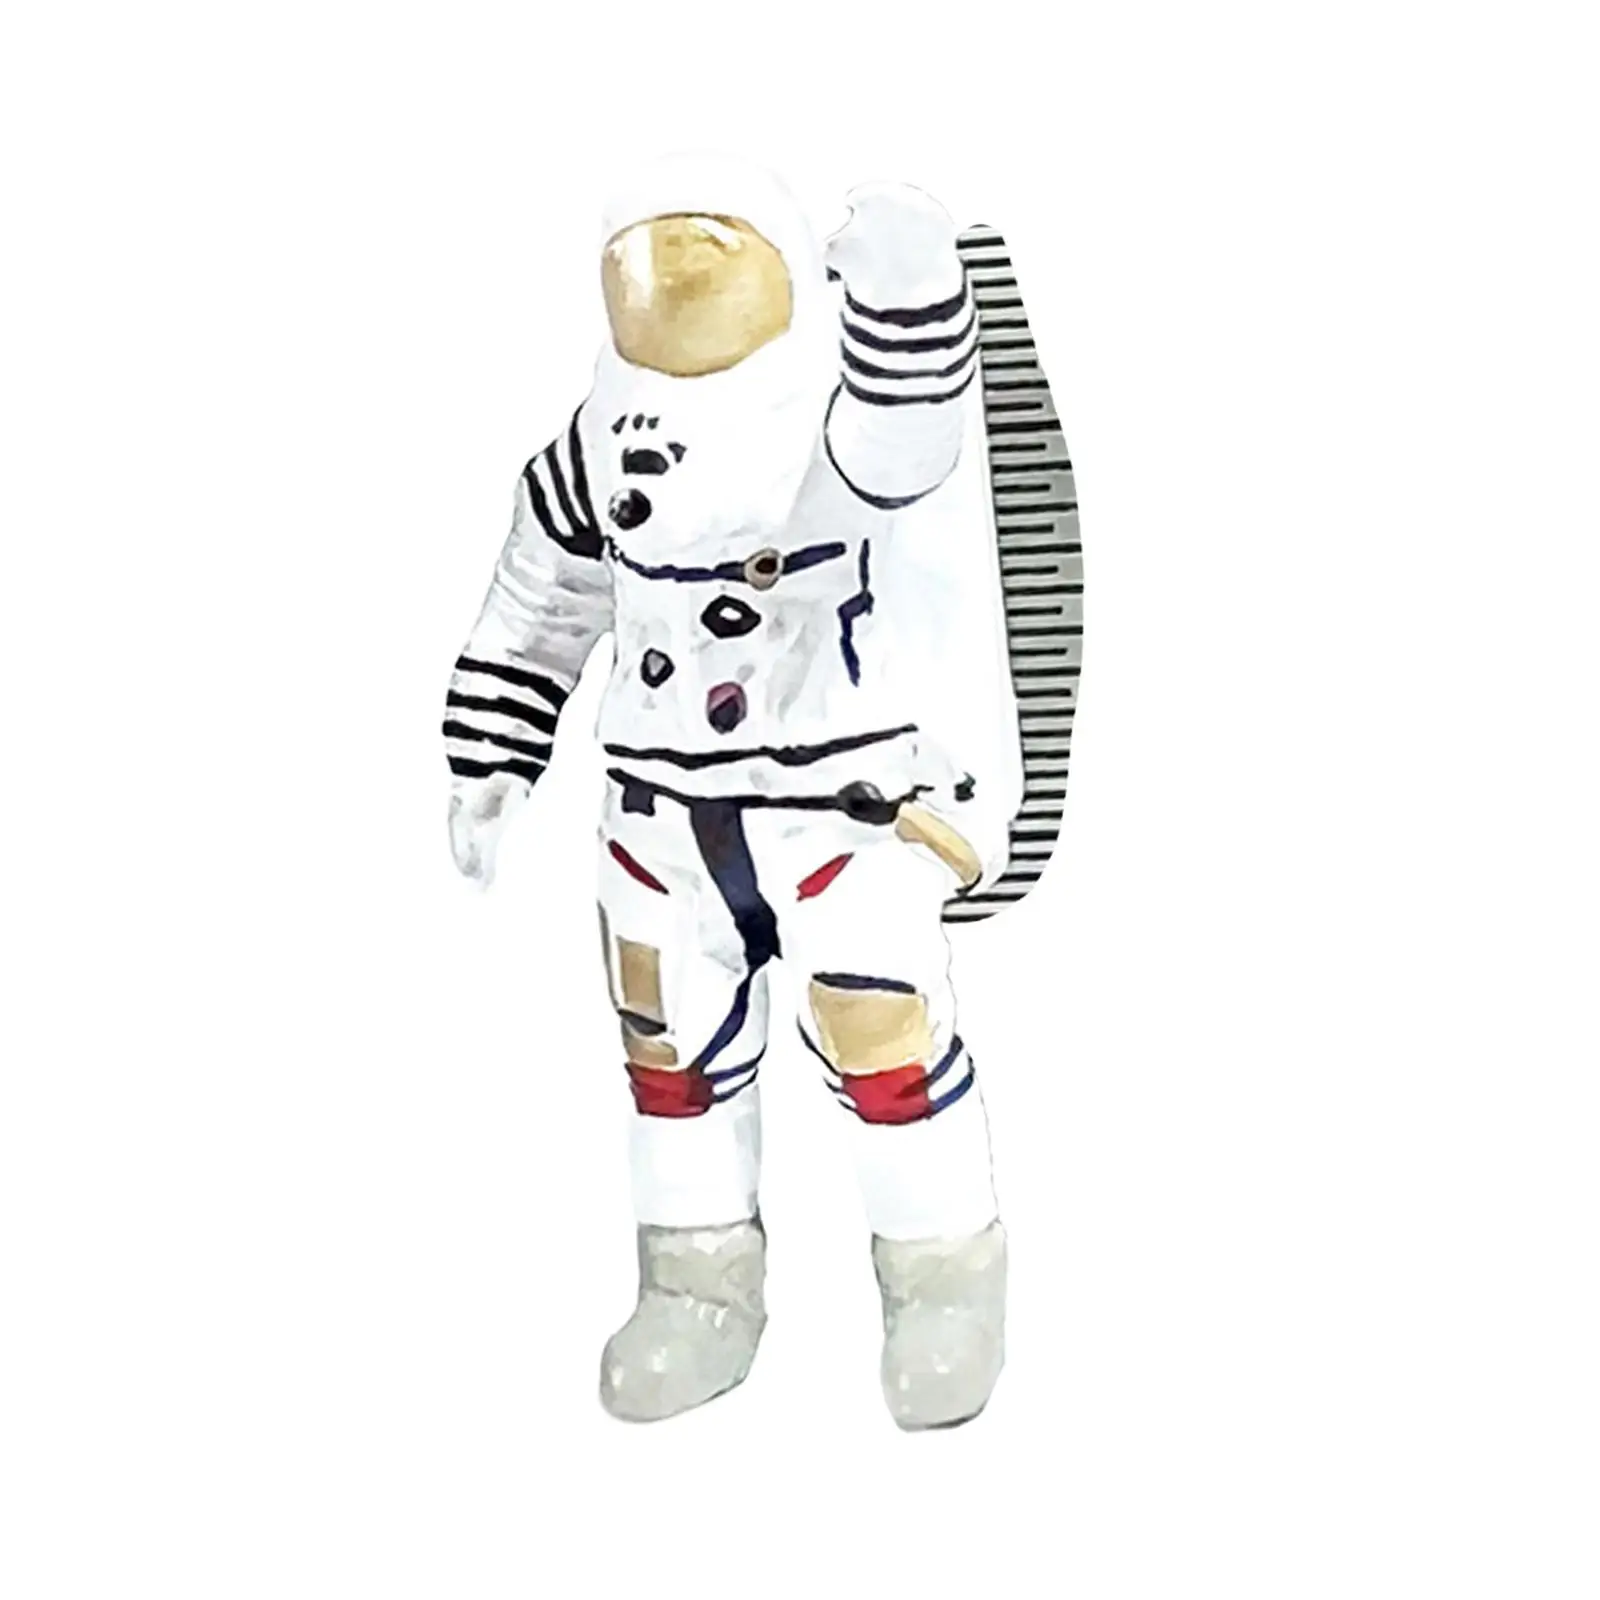 1/64 Scale Astronaut Figurines for Scenery Landscape Dollhouse Party Favor